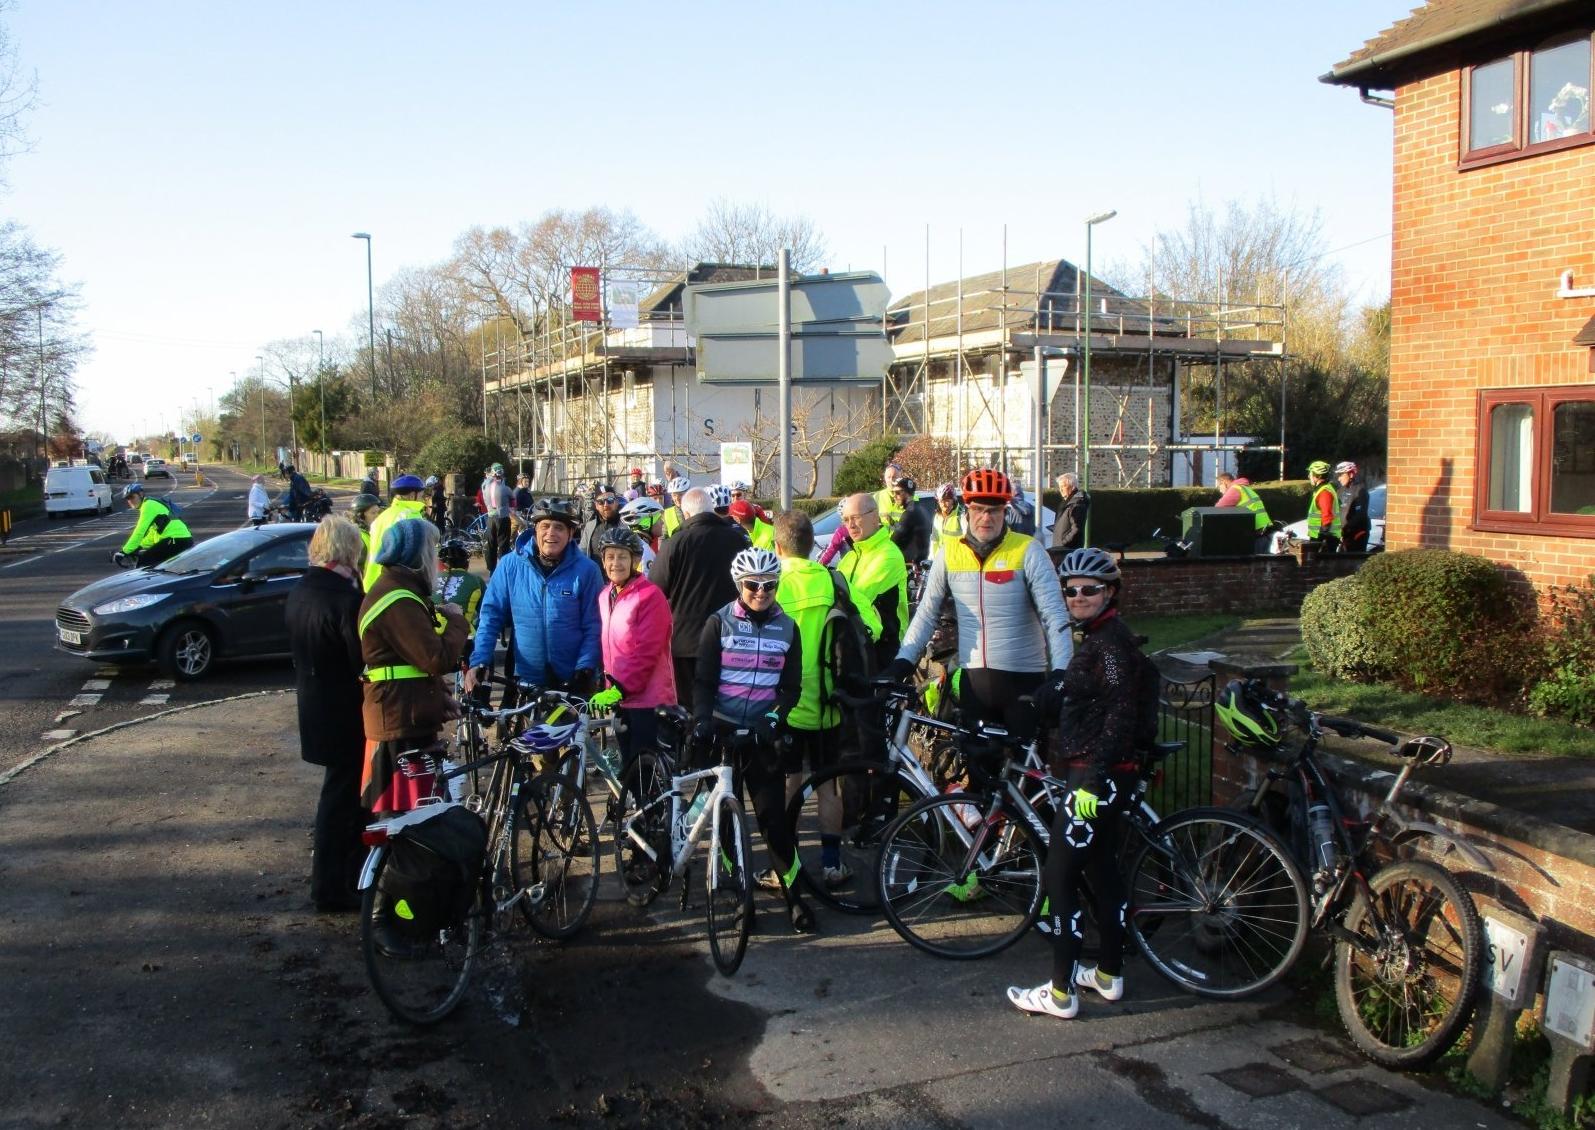 Following the death of well-known Bosham cyclist Gina McWilliam, a group of campaigners paid their respects and appealed for changes to the ‘inadequate’ road system at a well-attended event on Sunday. SUS-200122-104535001